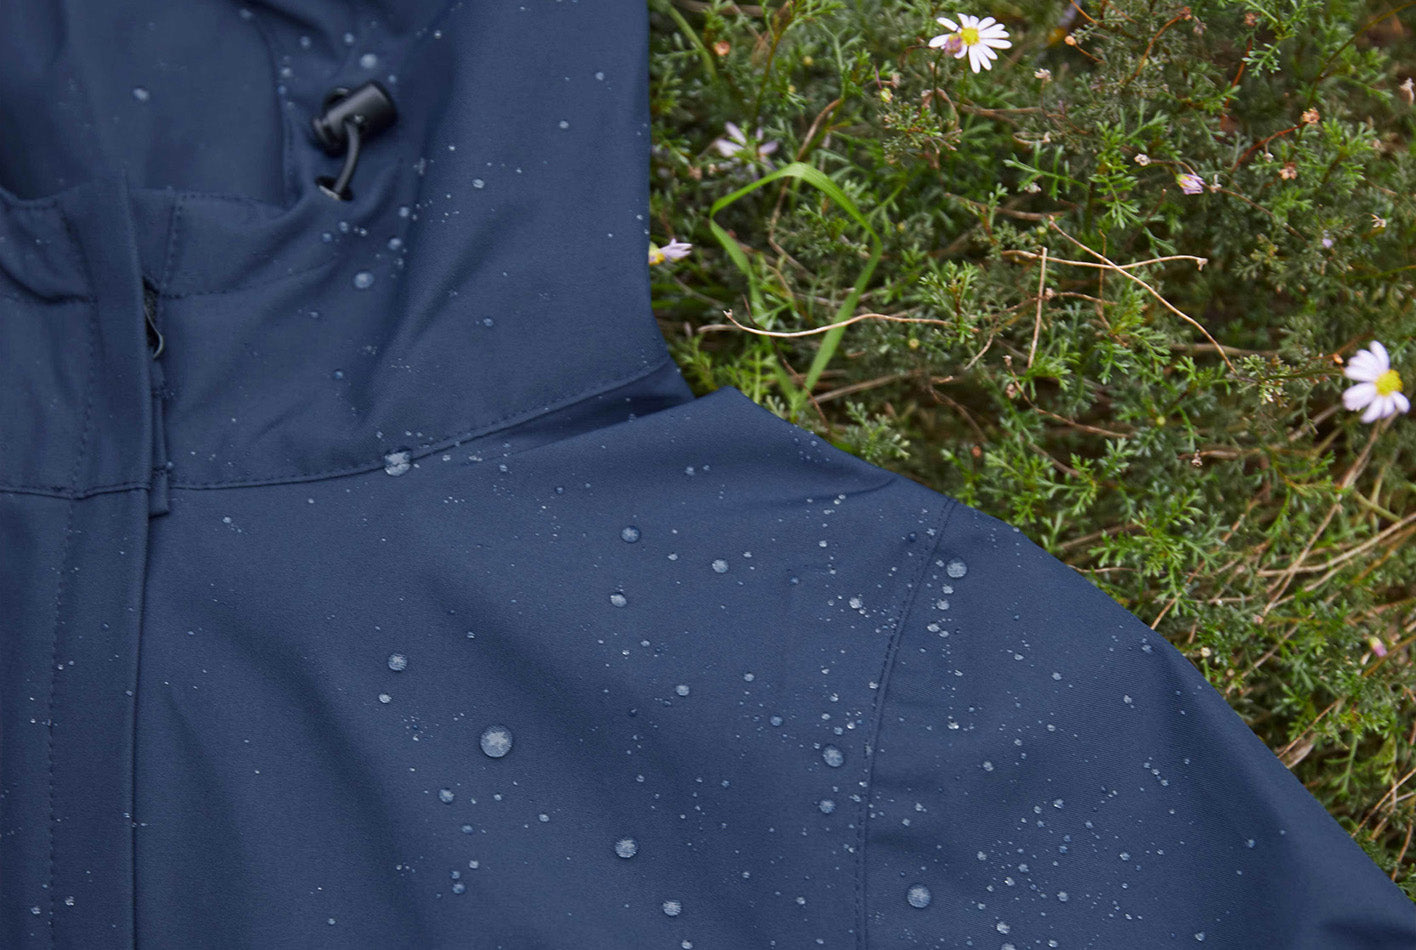 Top 5 Things to Look For When Buying a Raincoat